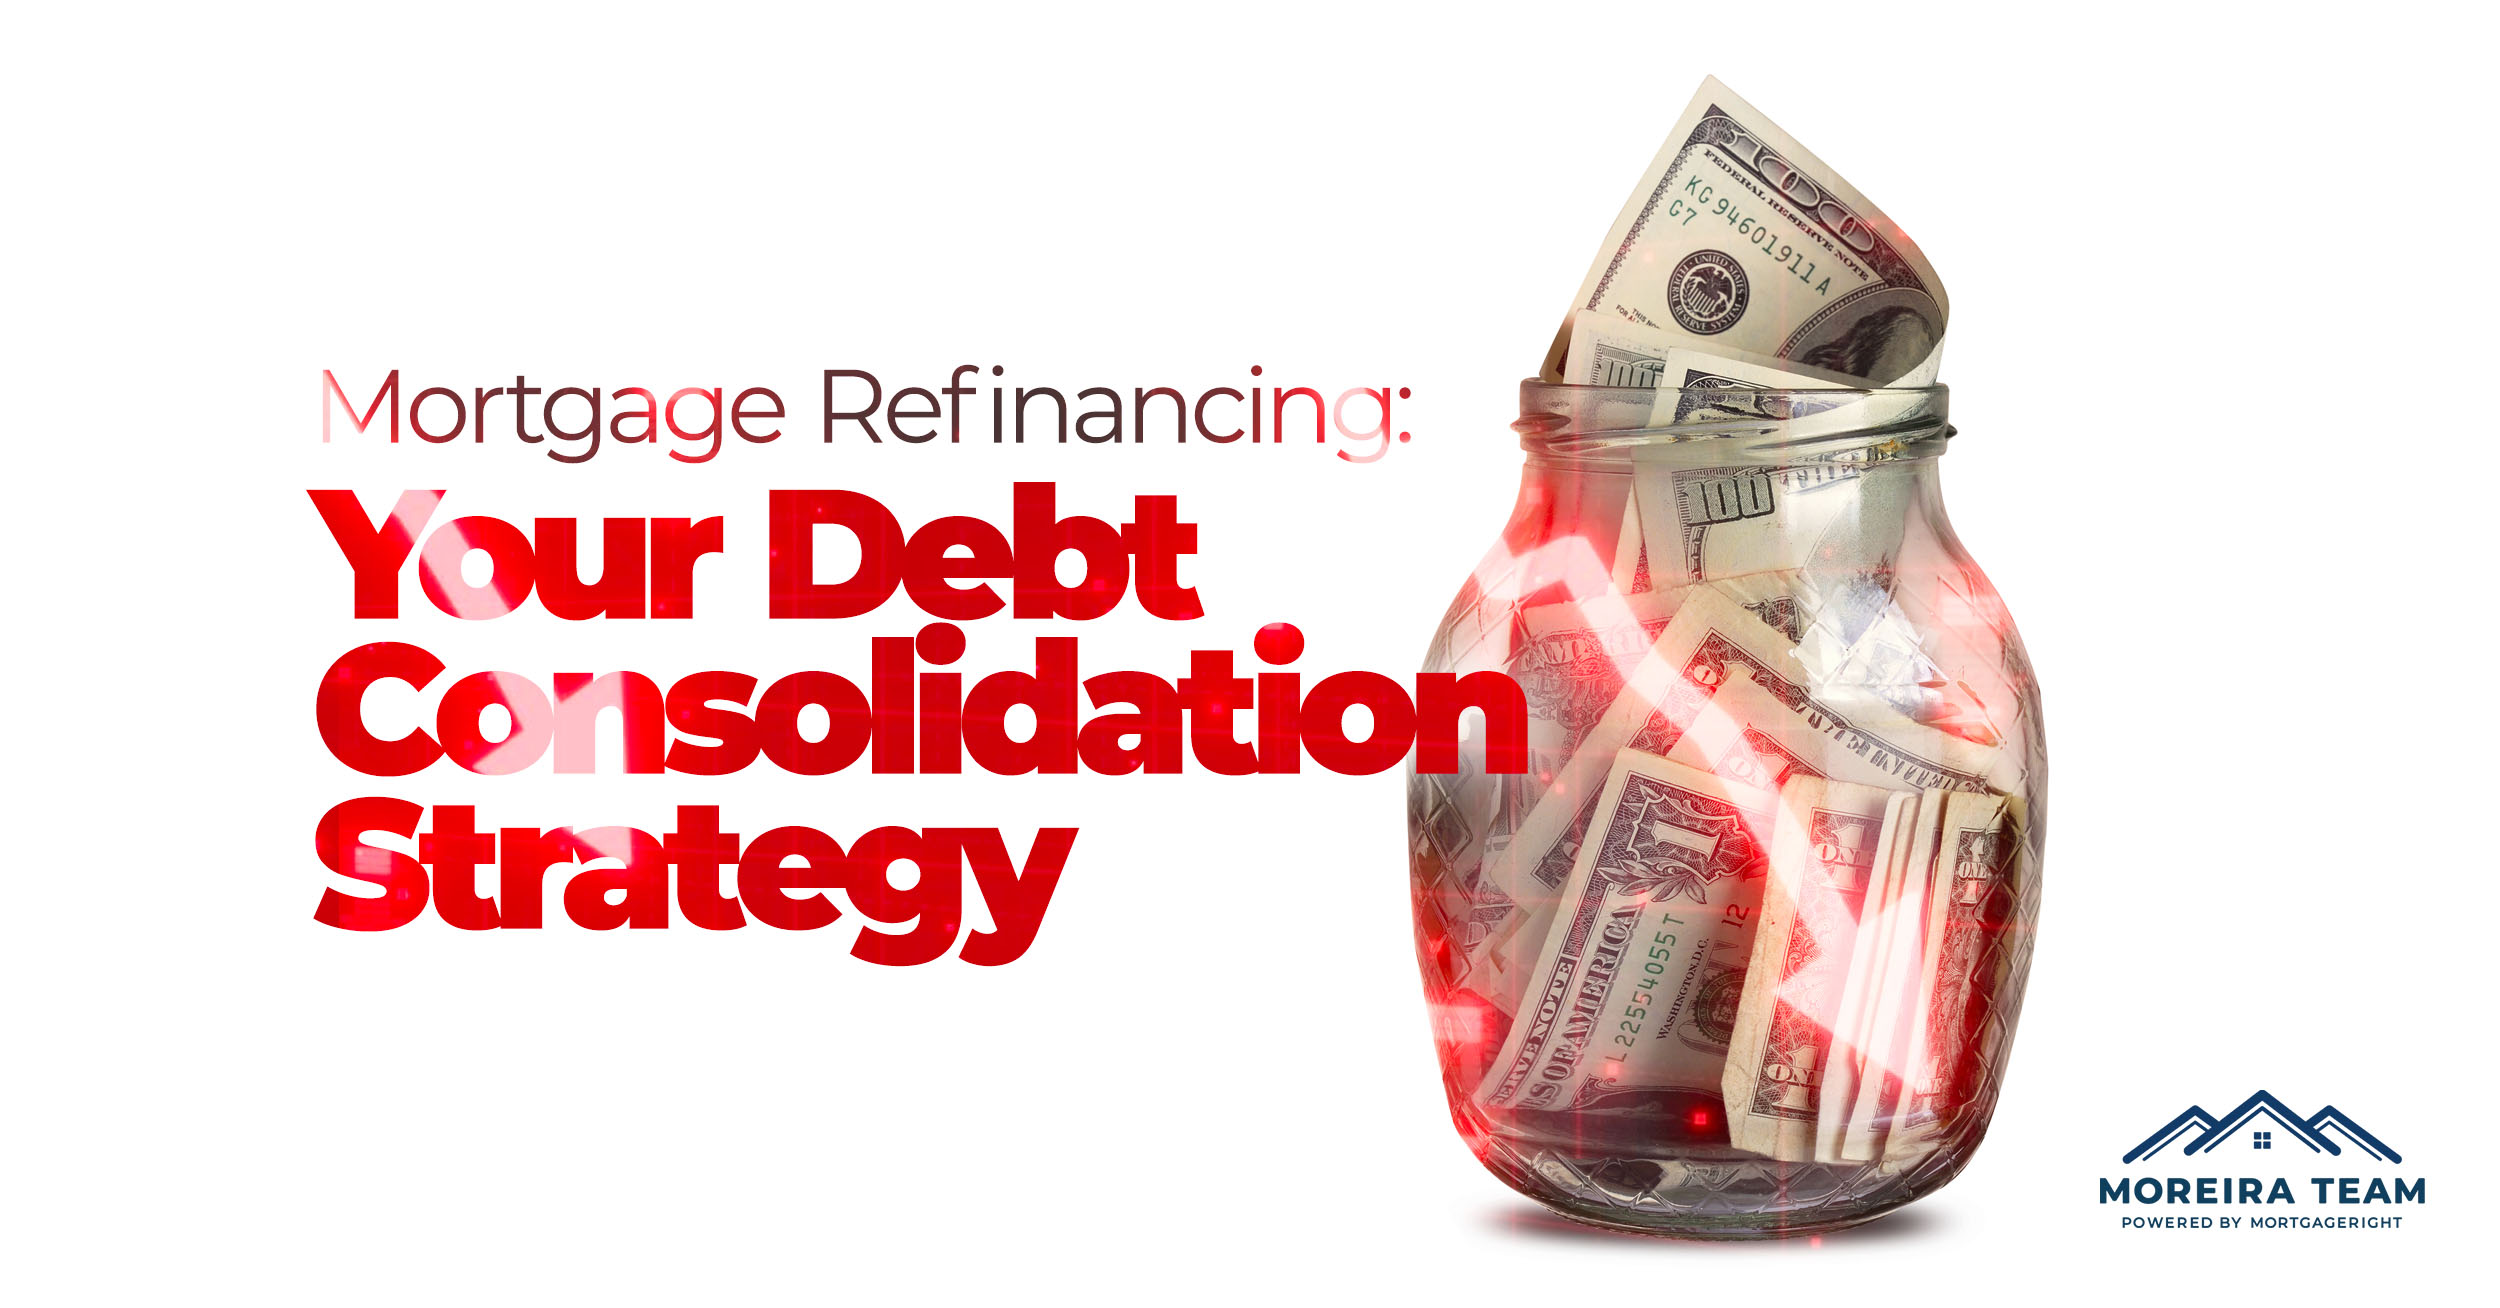 Mortgage Refinancing: Your Debt Consolidation Strategy